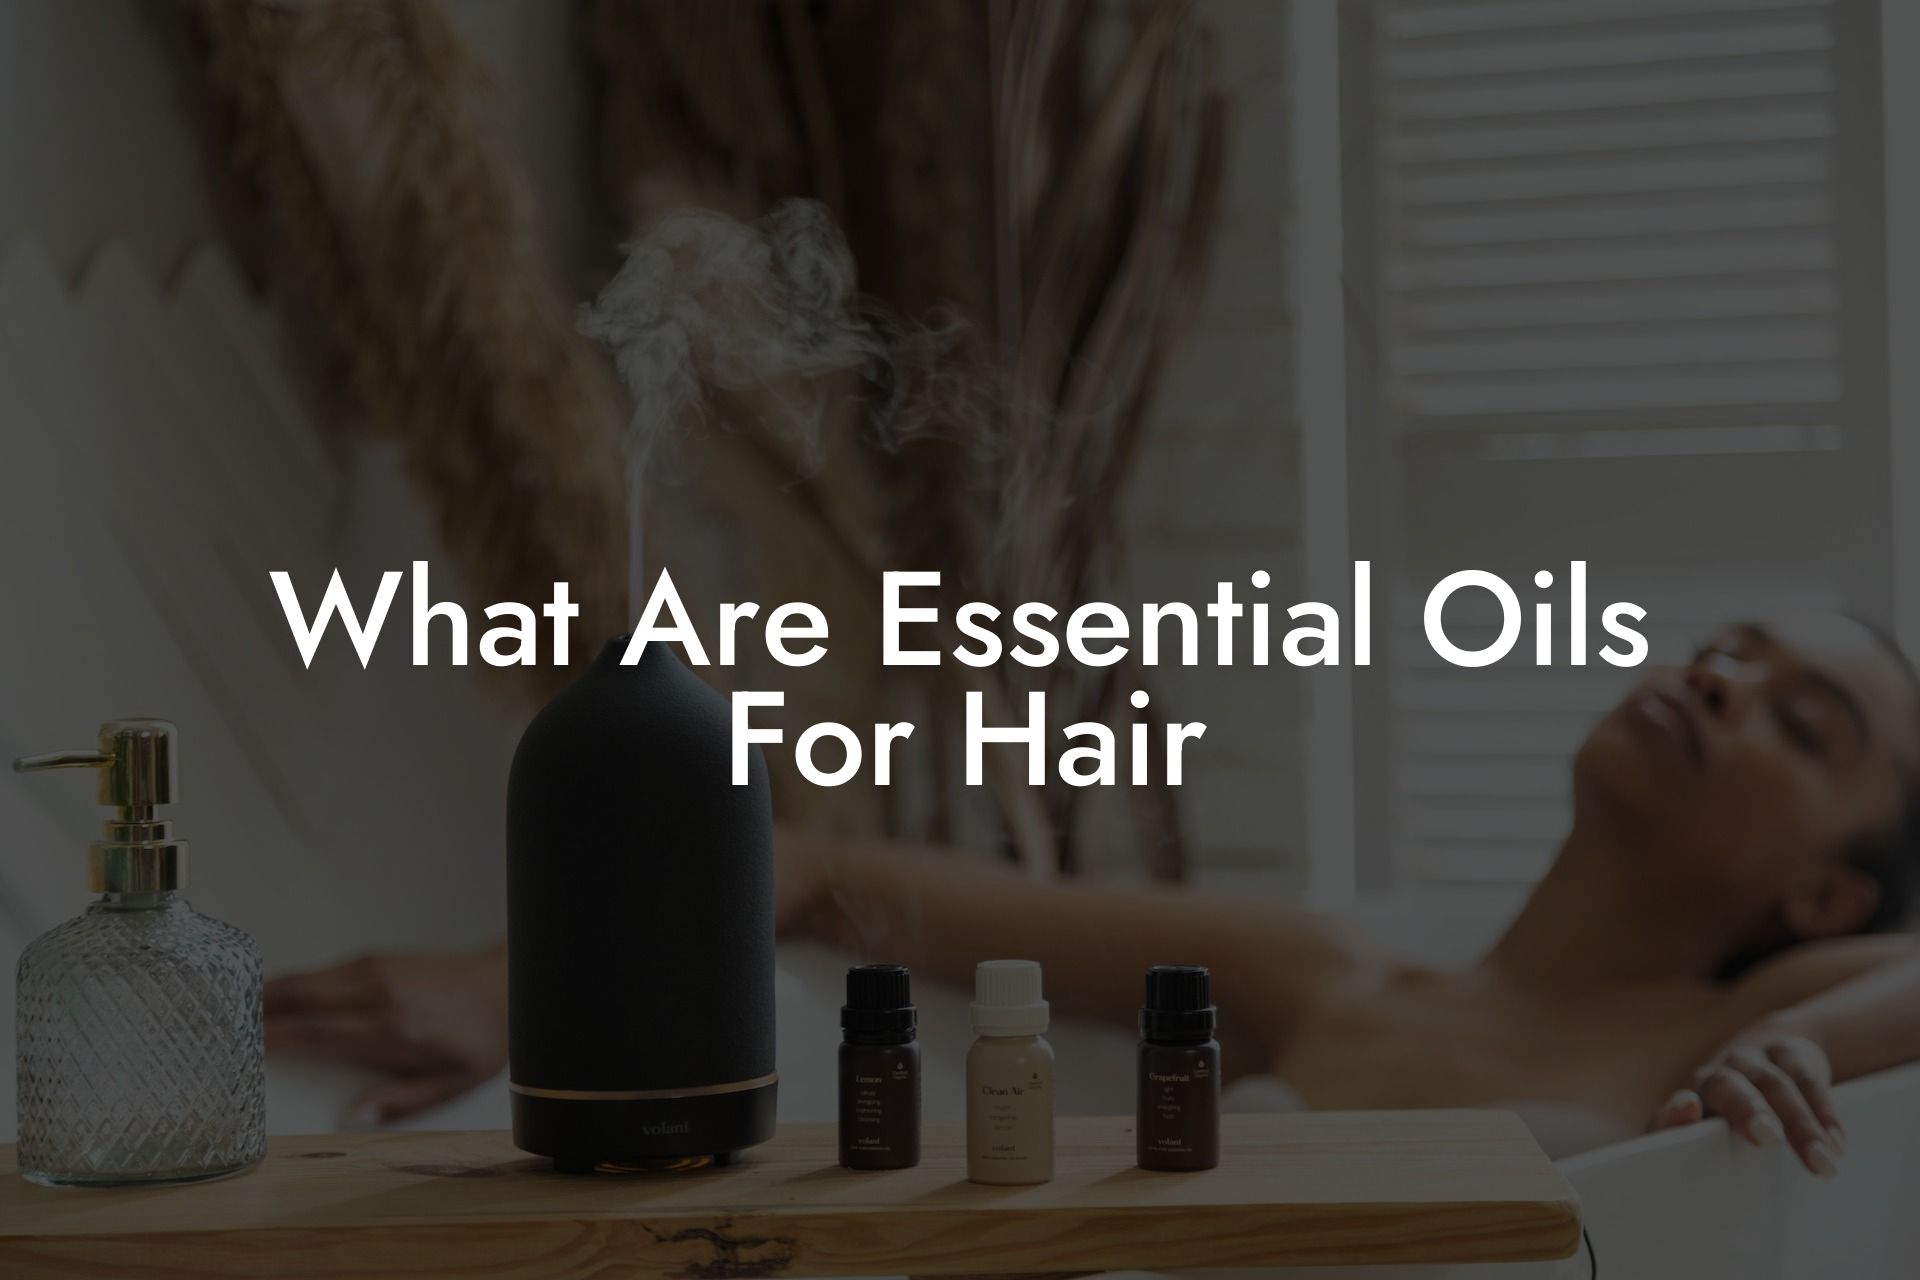 What Are Essential Oils For Hair